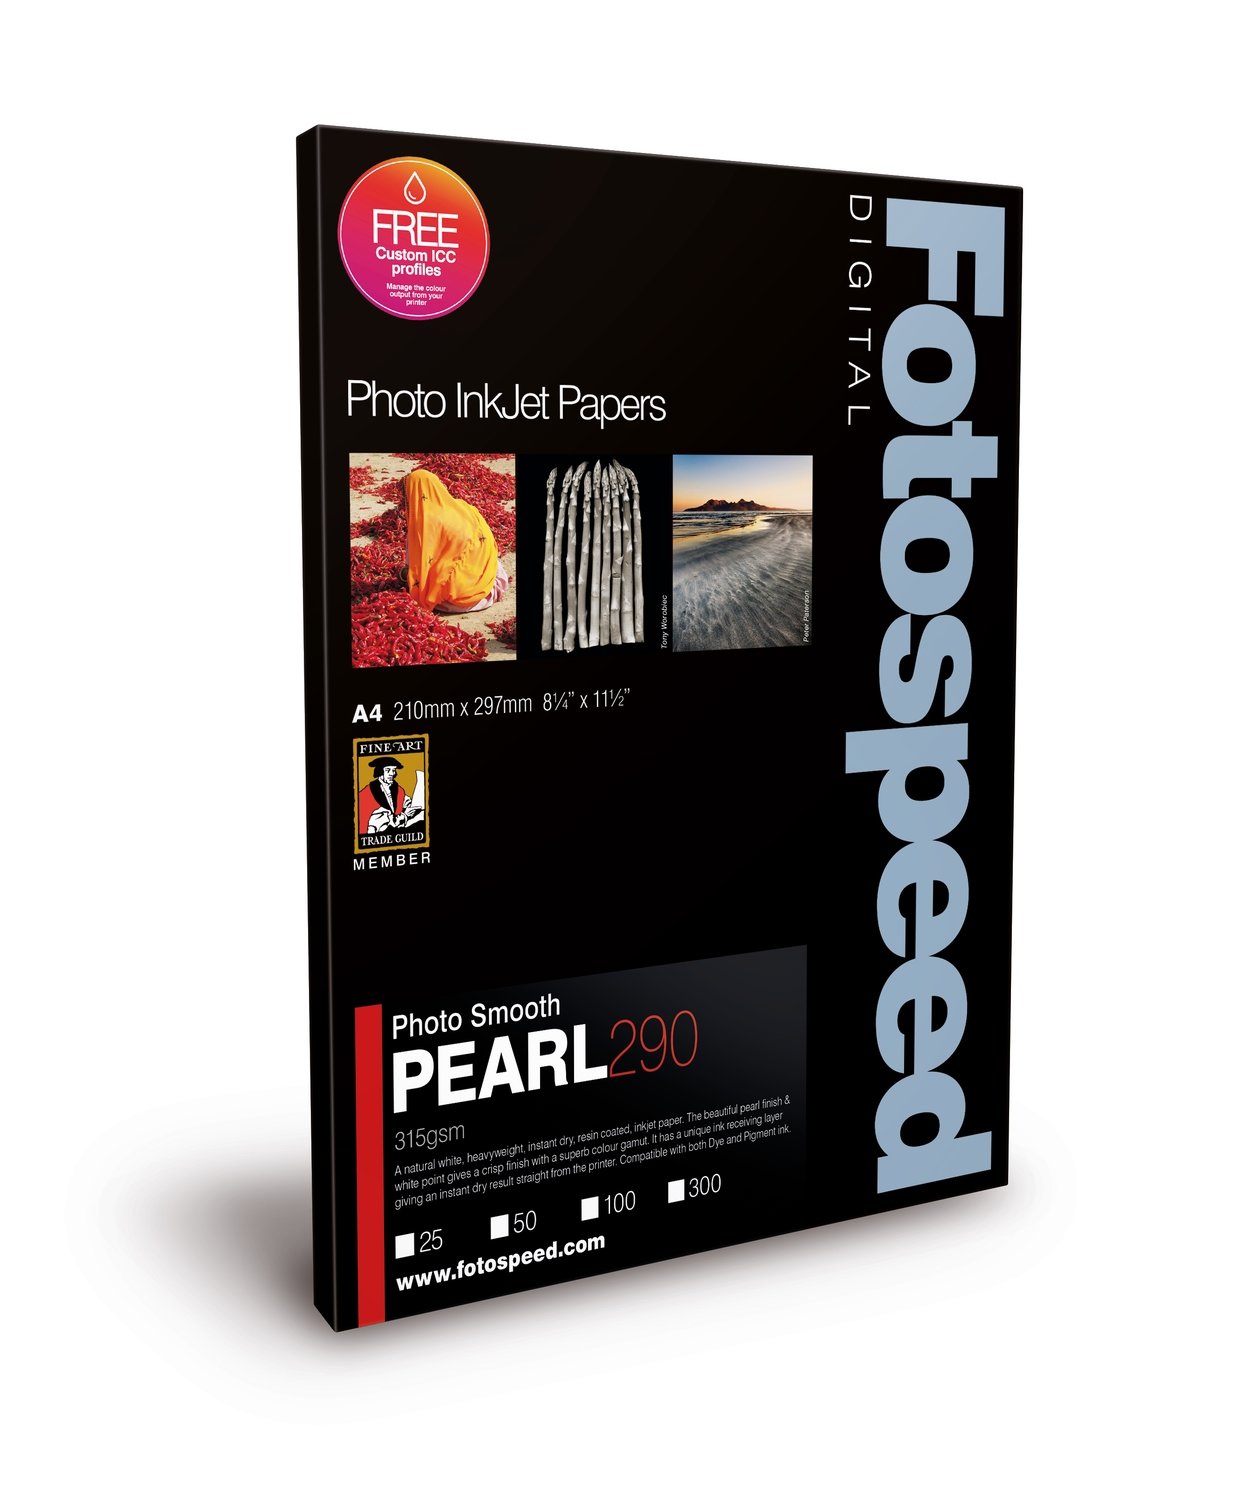 Fotospeed Photo Smooth Pearl 290 (A4, 50 sheets) - 7D589